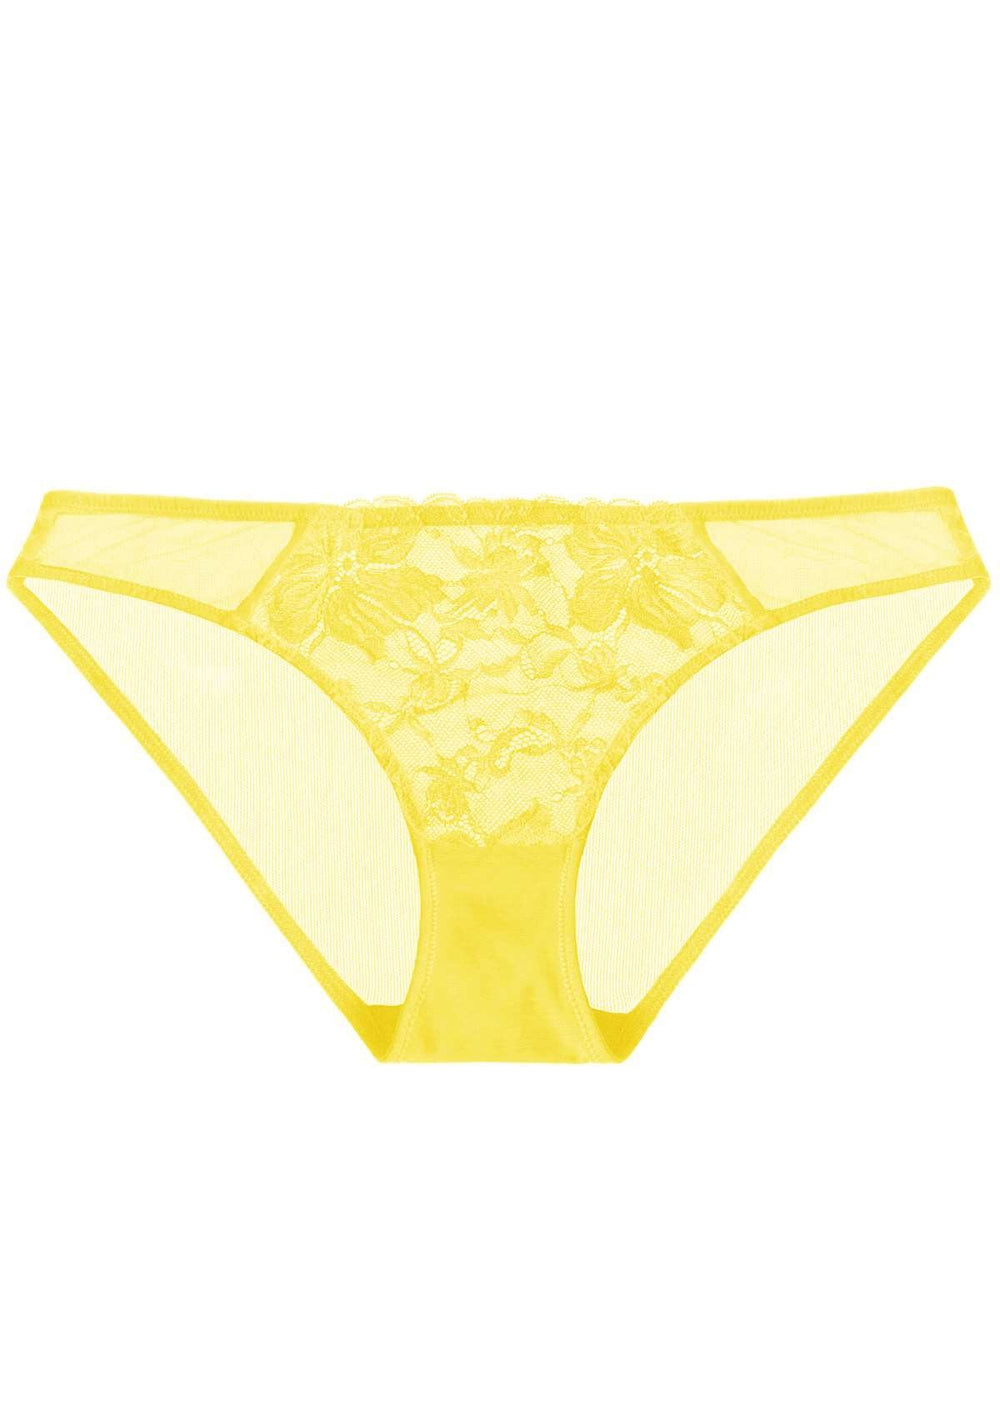 YiHWEI Female Short Yellow Lingerie for Women 3 Pack Mixed Color Women's  Cotton High Waisted Underwear L